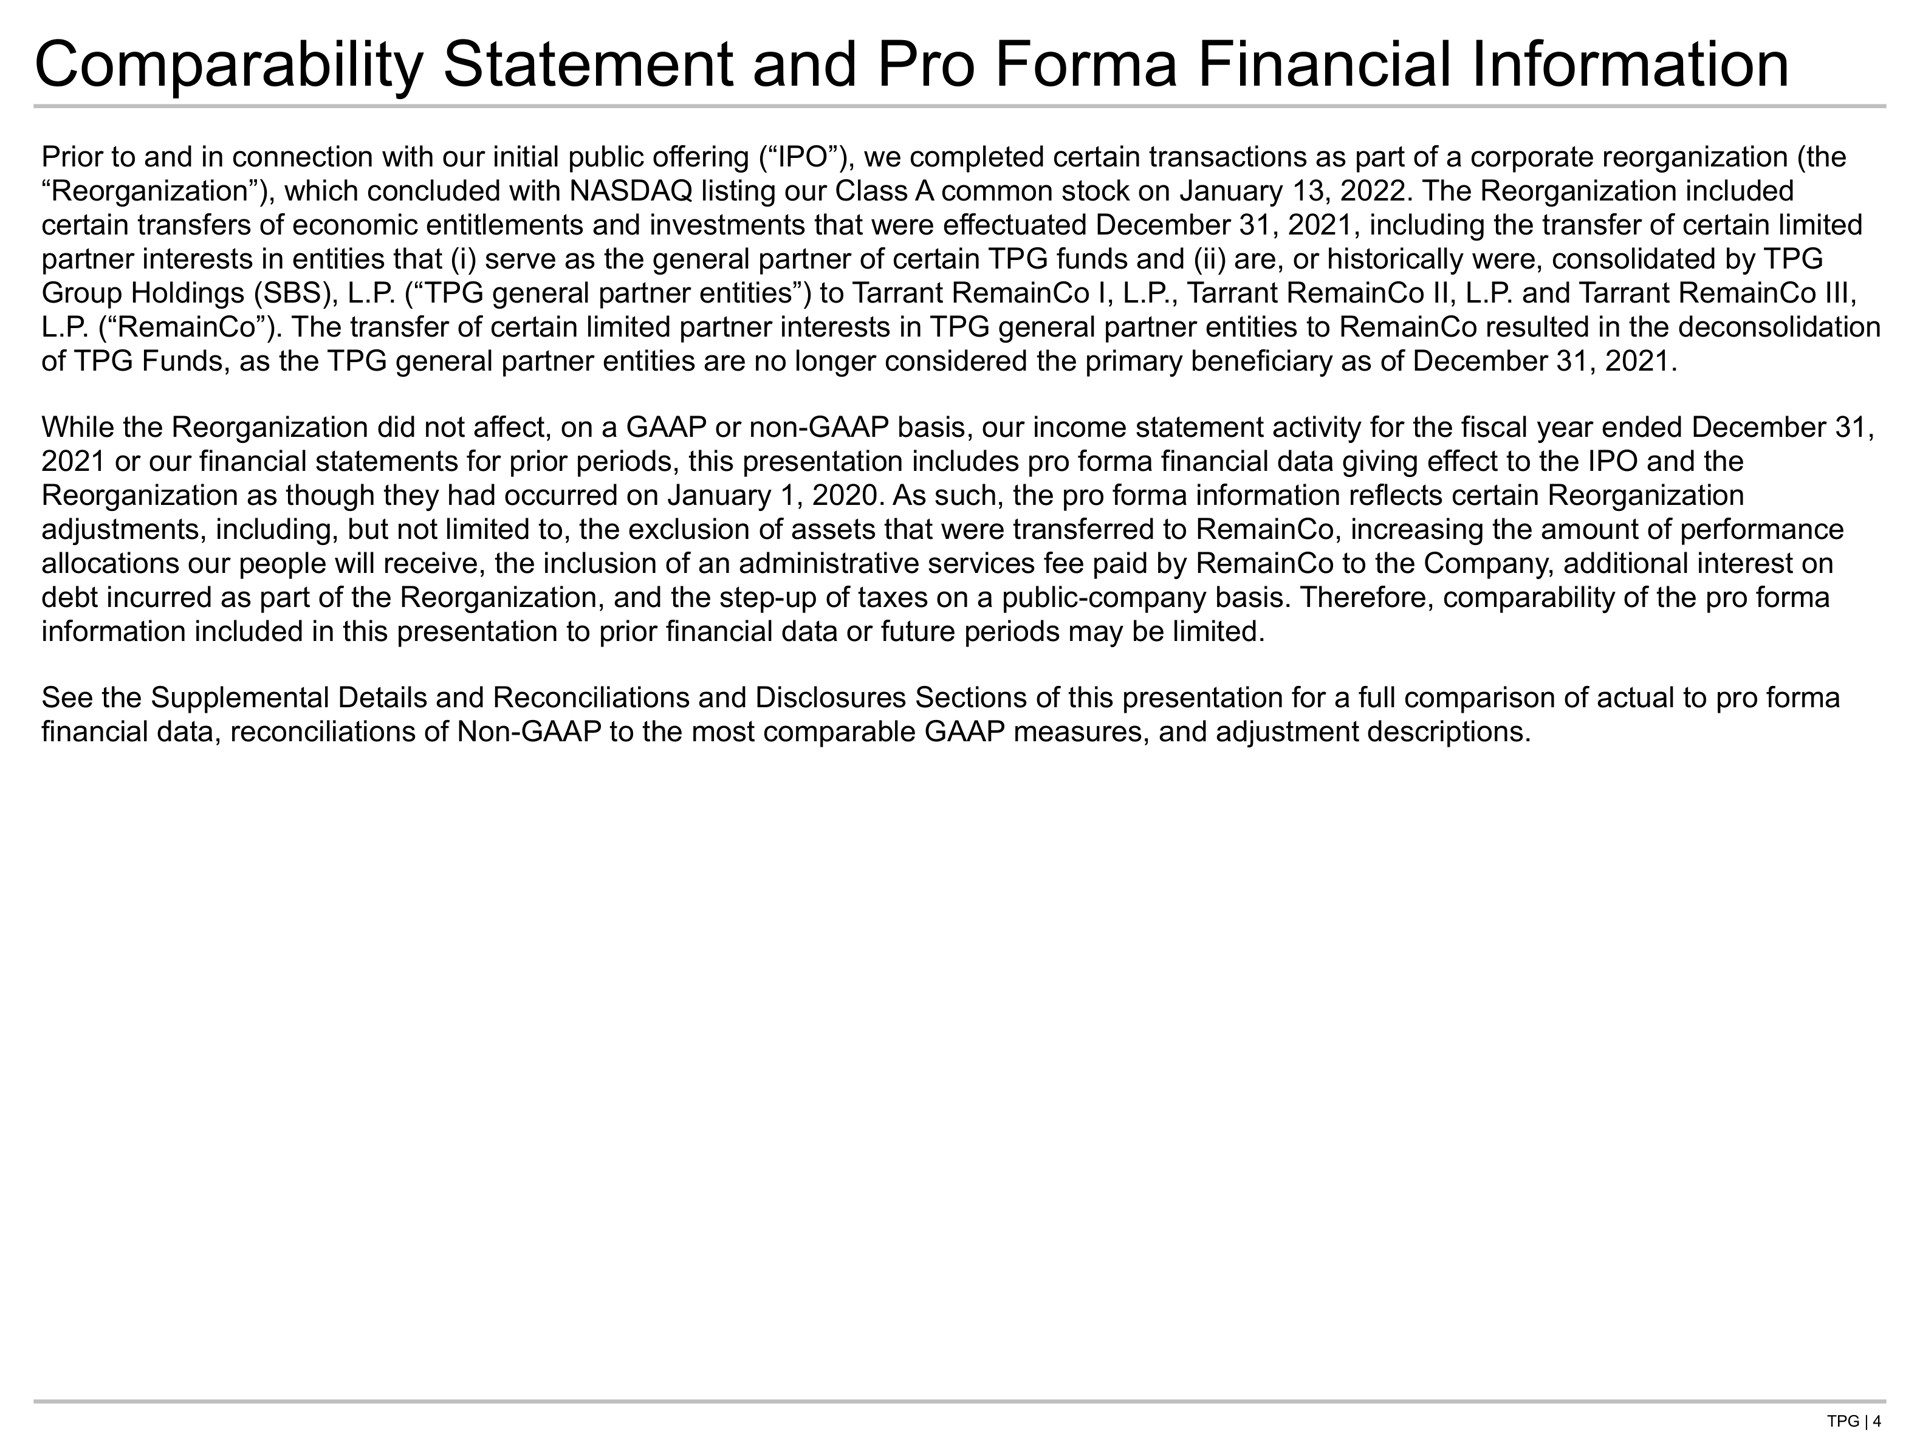 comparability statement and pro financial information | TPG